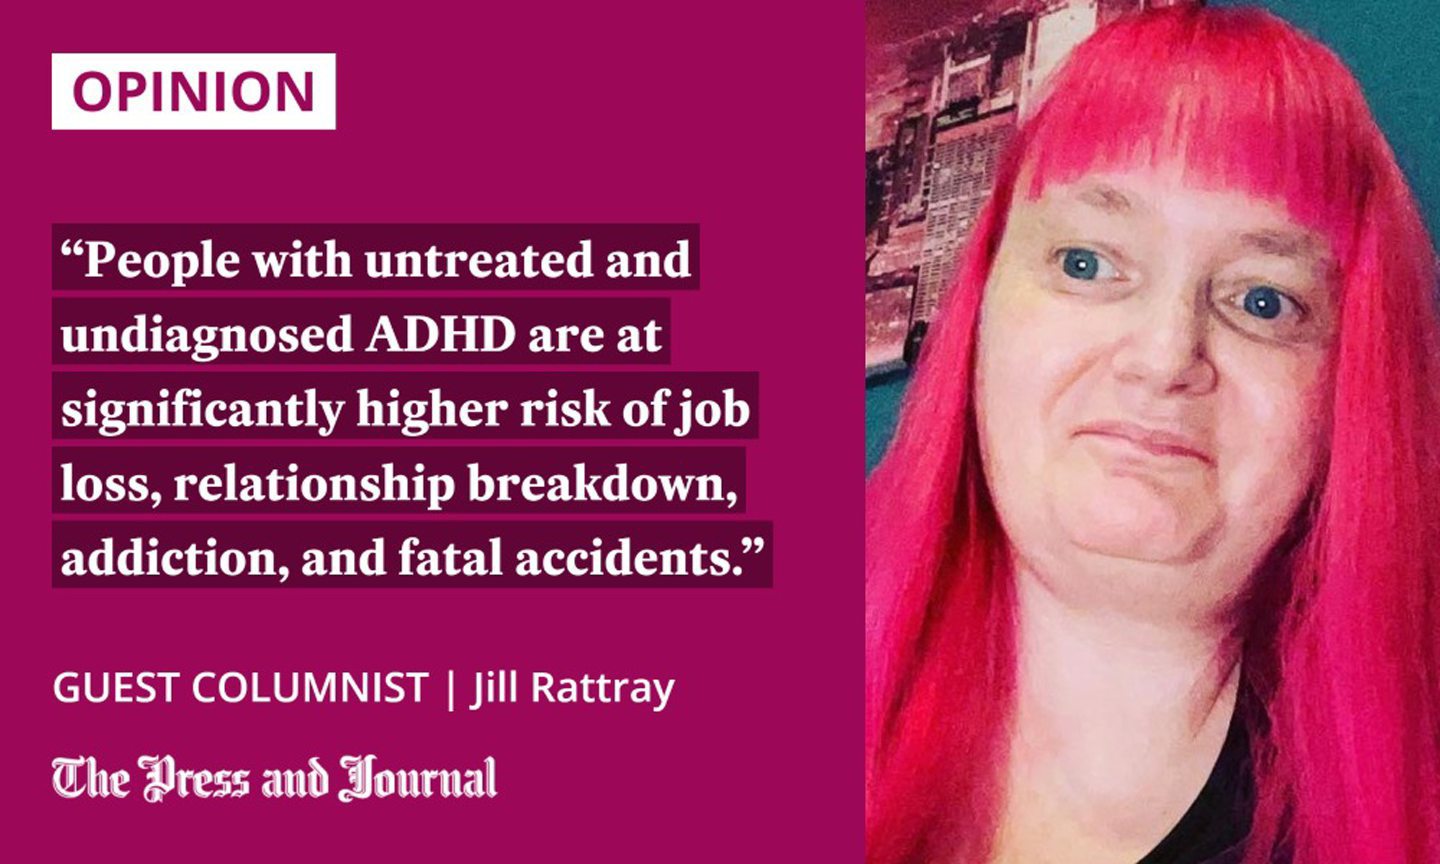 Quotation from guest columnist Jill Rattray: 'People with untreated and undiagnosed ADHD are at significantly higher risk of job loss, relationship breakdown, addiction and fatal accidents.'